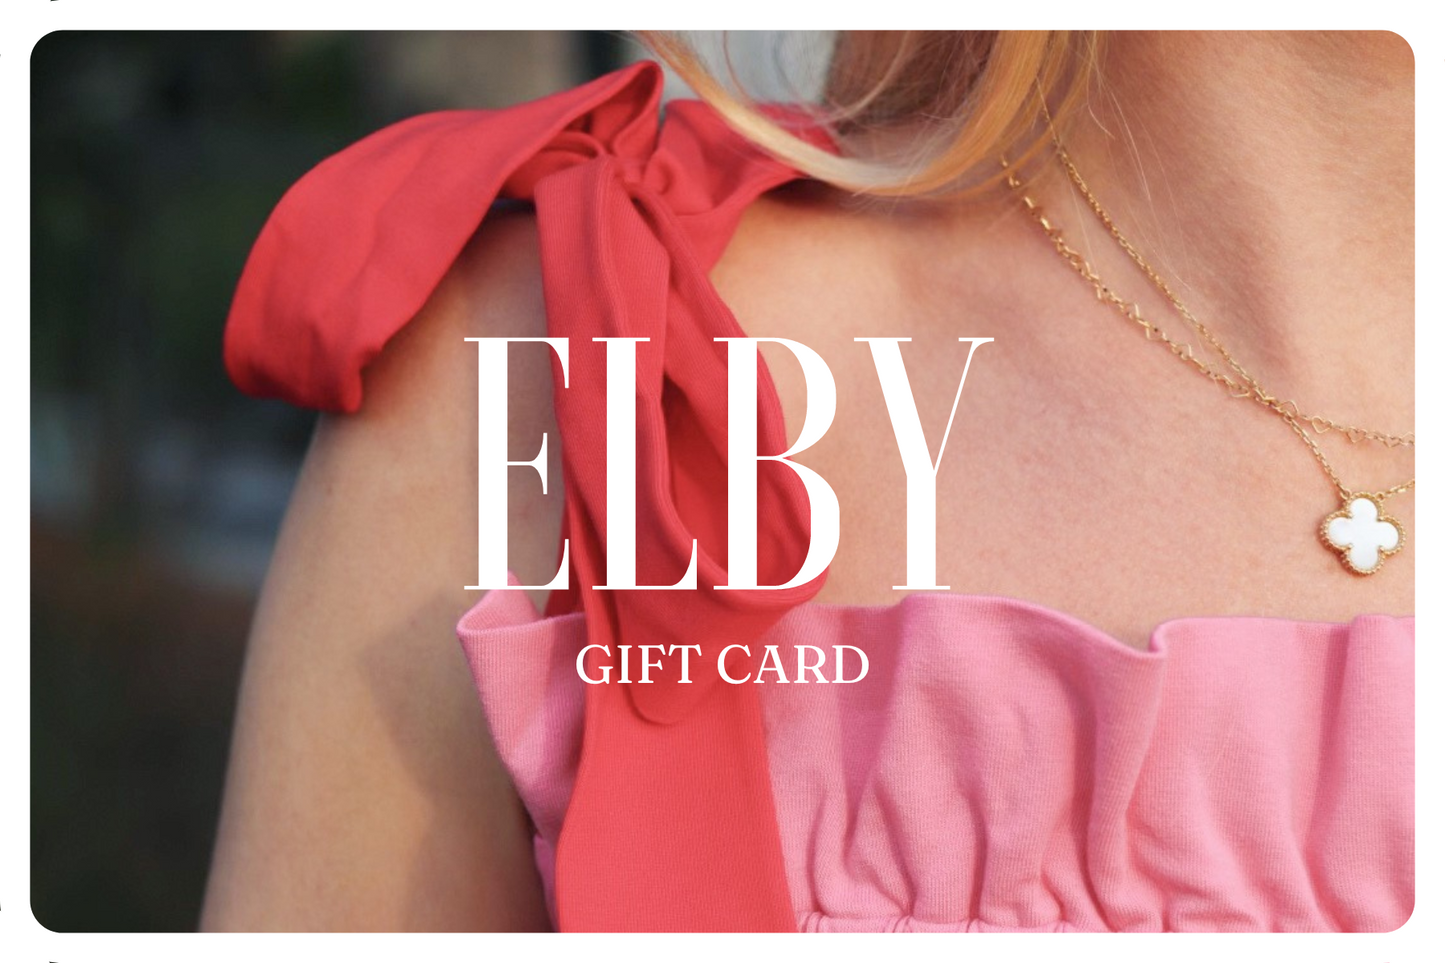 Elby Gift Card